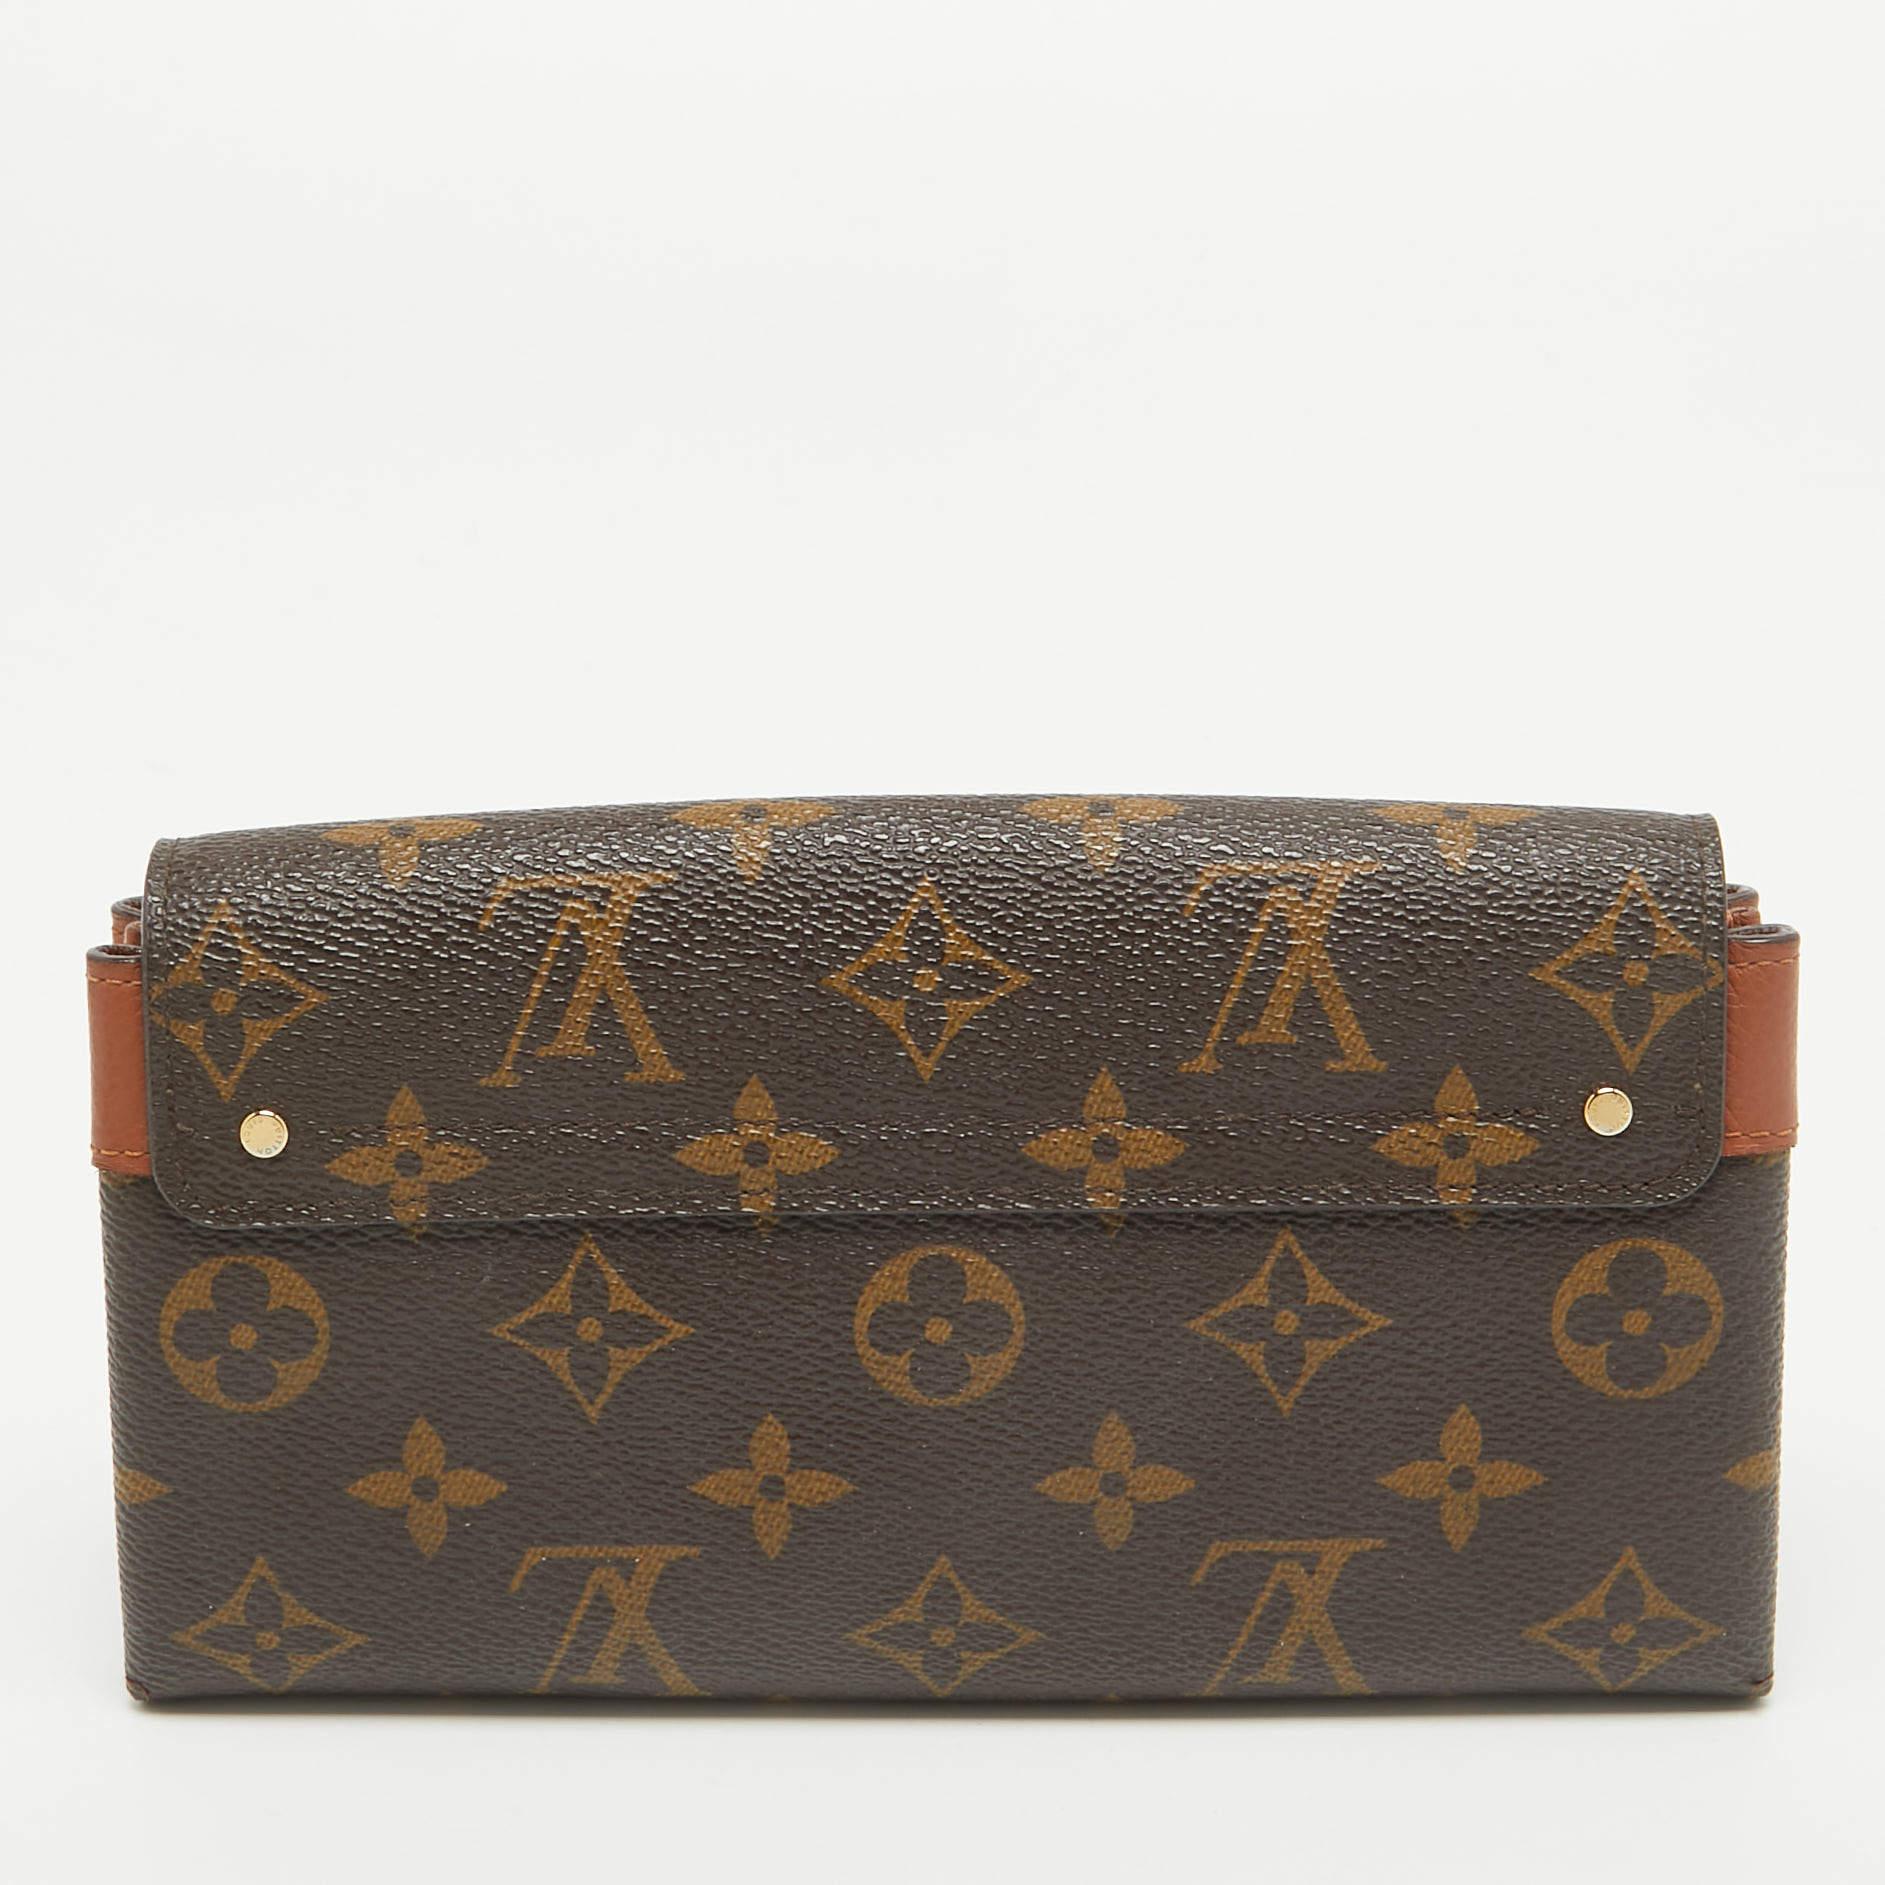 Made using signature Monogram canvas, this Elysee wallet from Louis Vuitton is a gorgeous creation. The flap with a metal lock closure opens to an interior housing multiple card slots, a zipped pocket, and open compartments.

